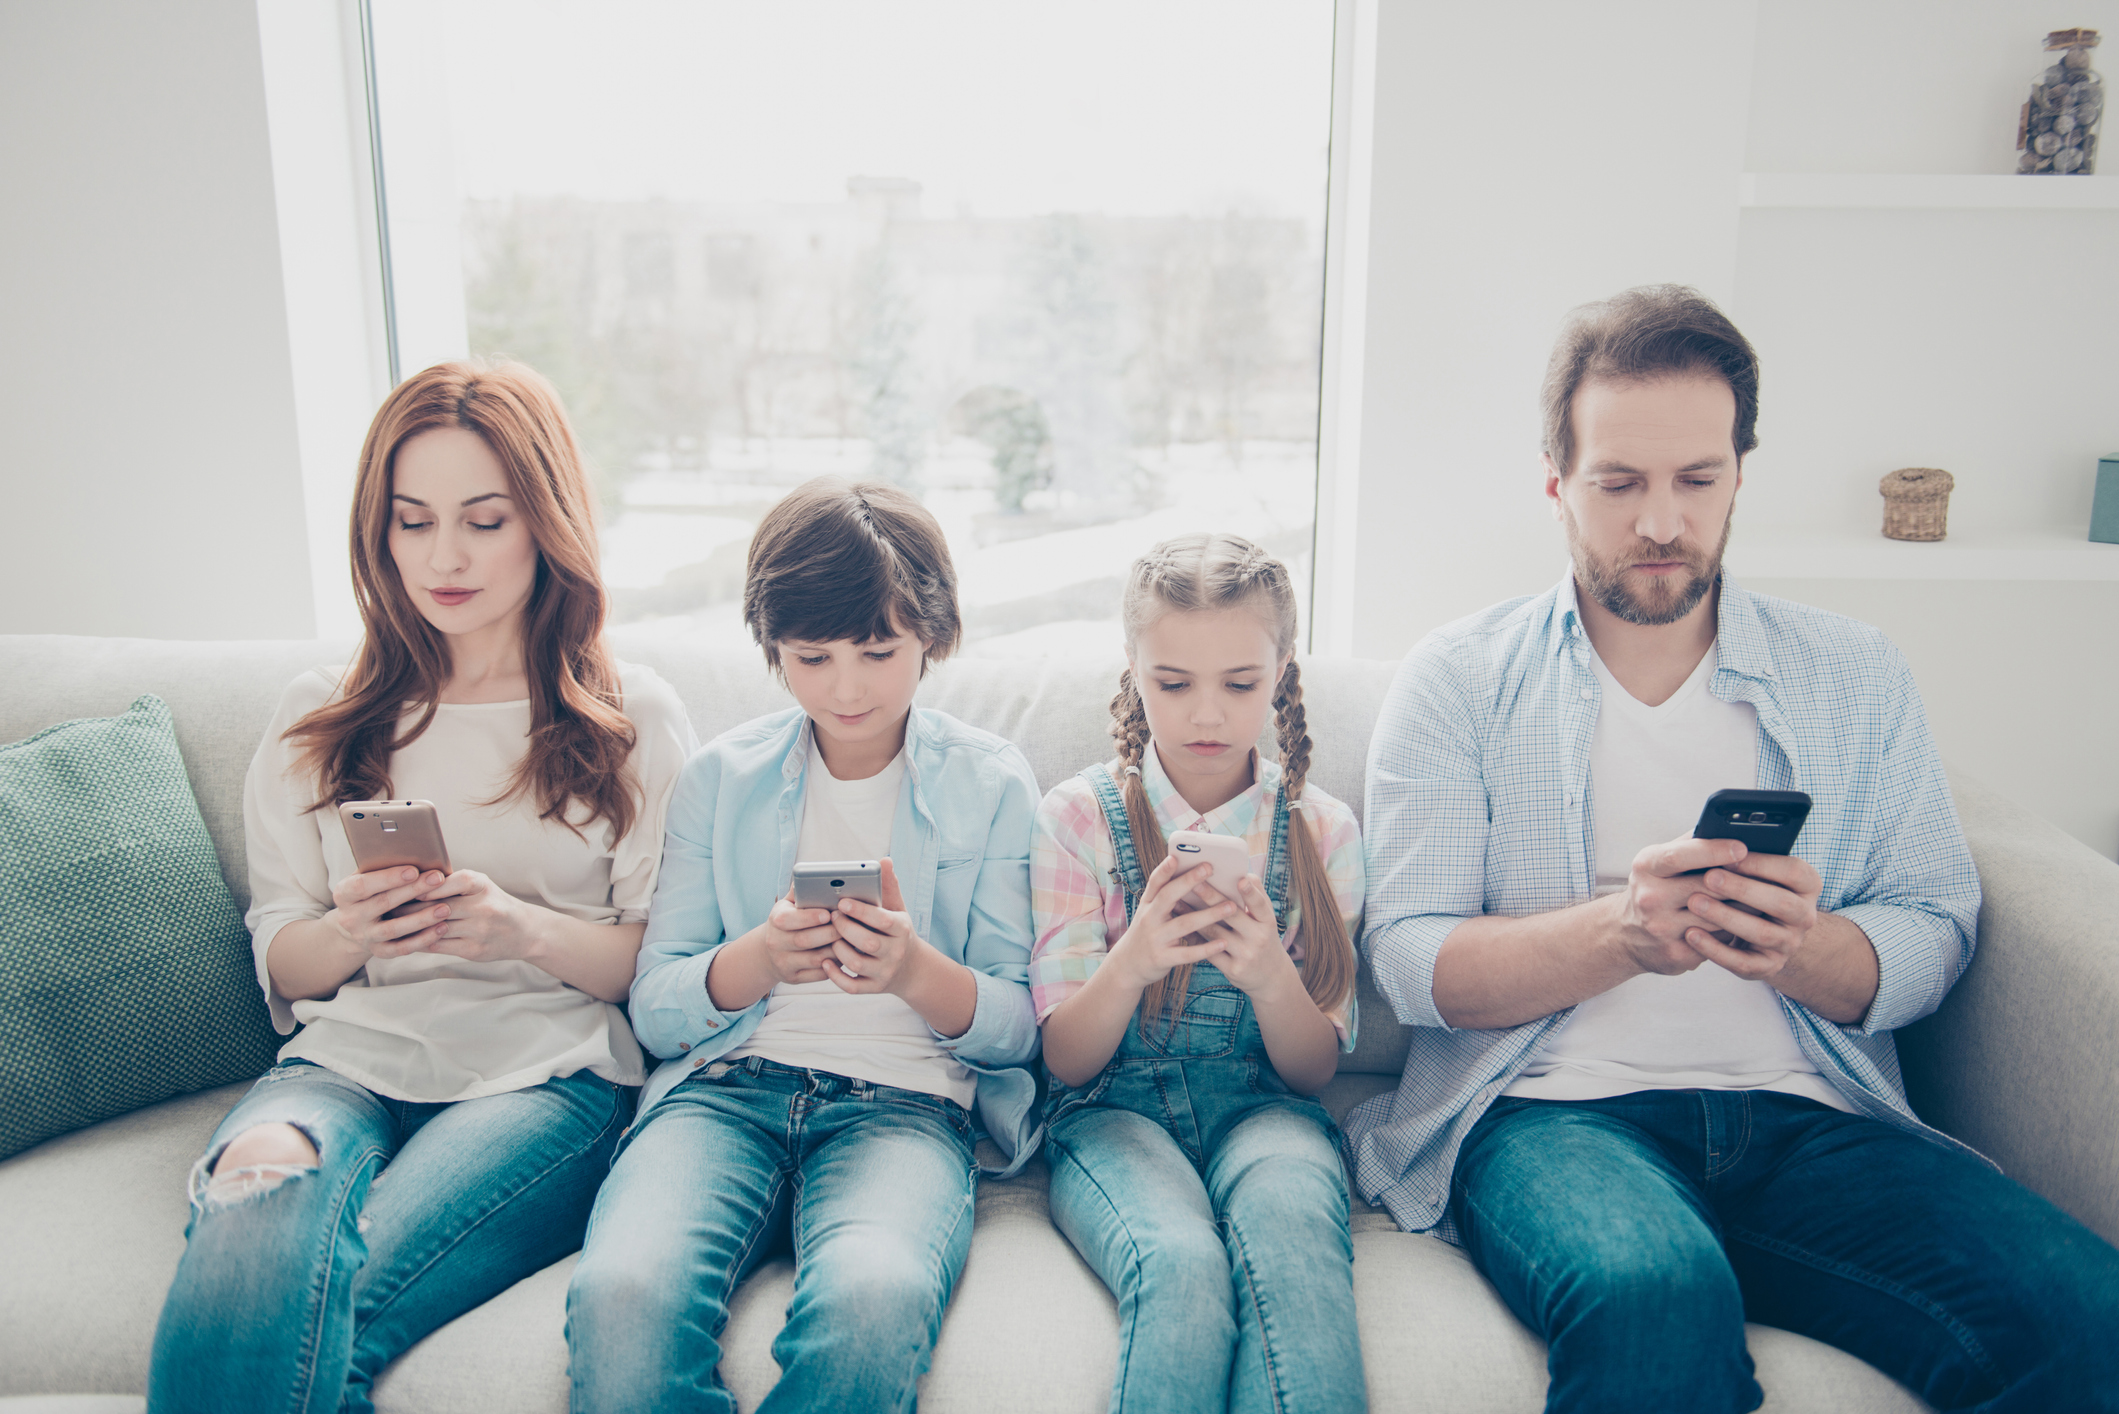 How heavy screen time is hurting us and how to cut down